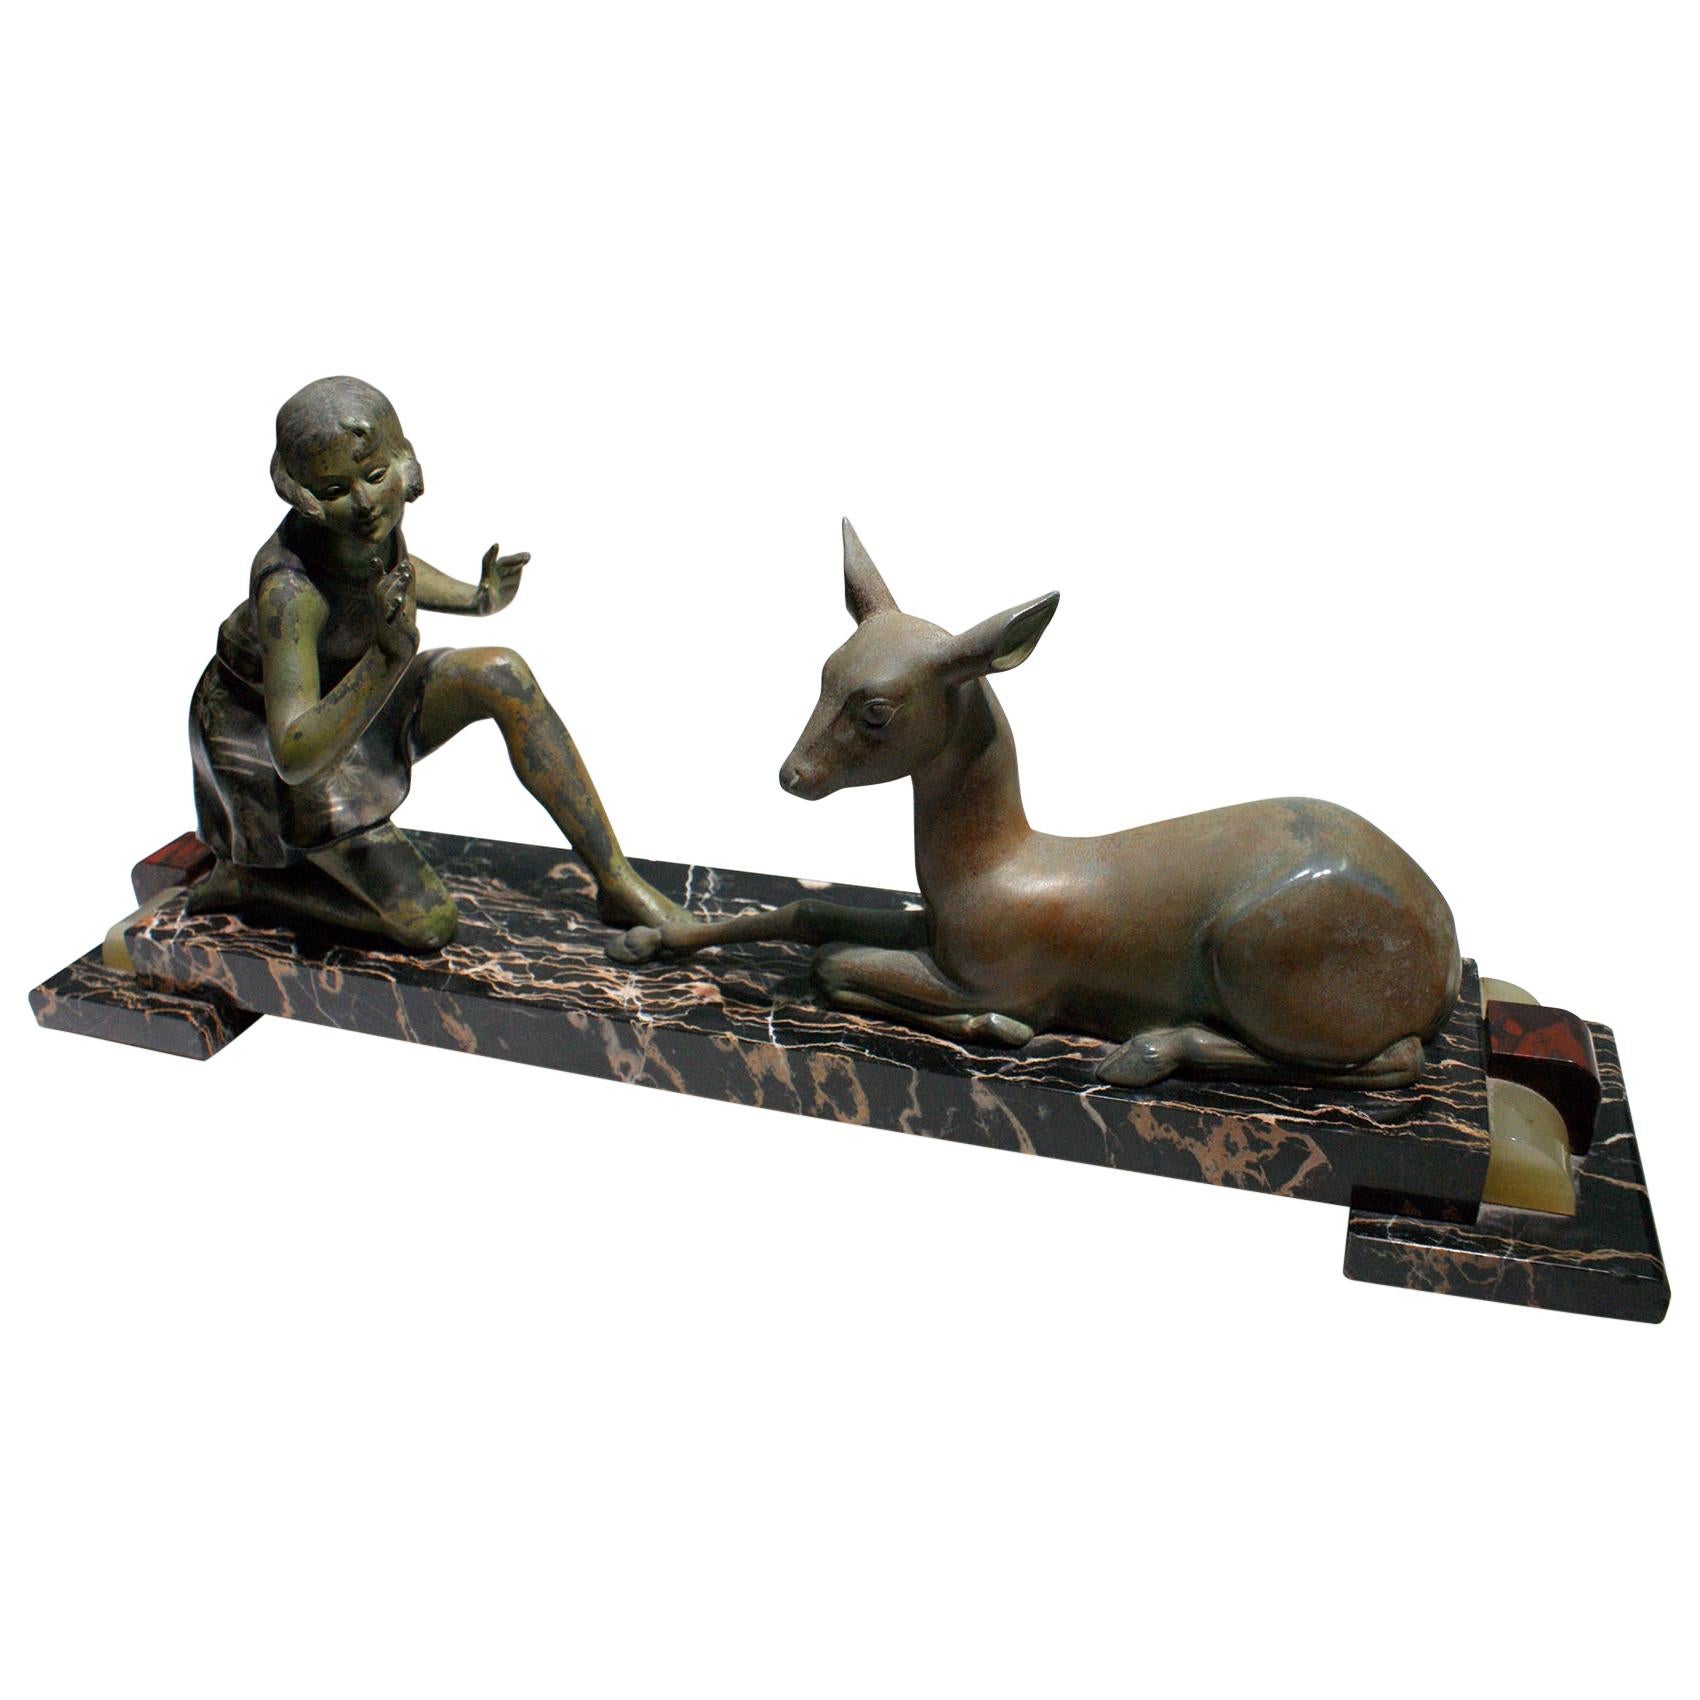 “Girl and Deer” Charming French Art Deco Sculpture